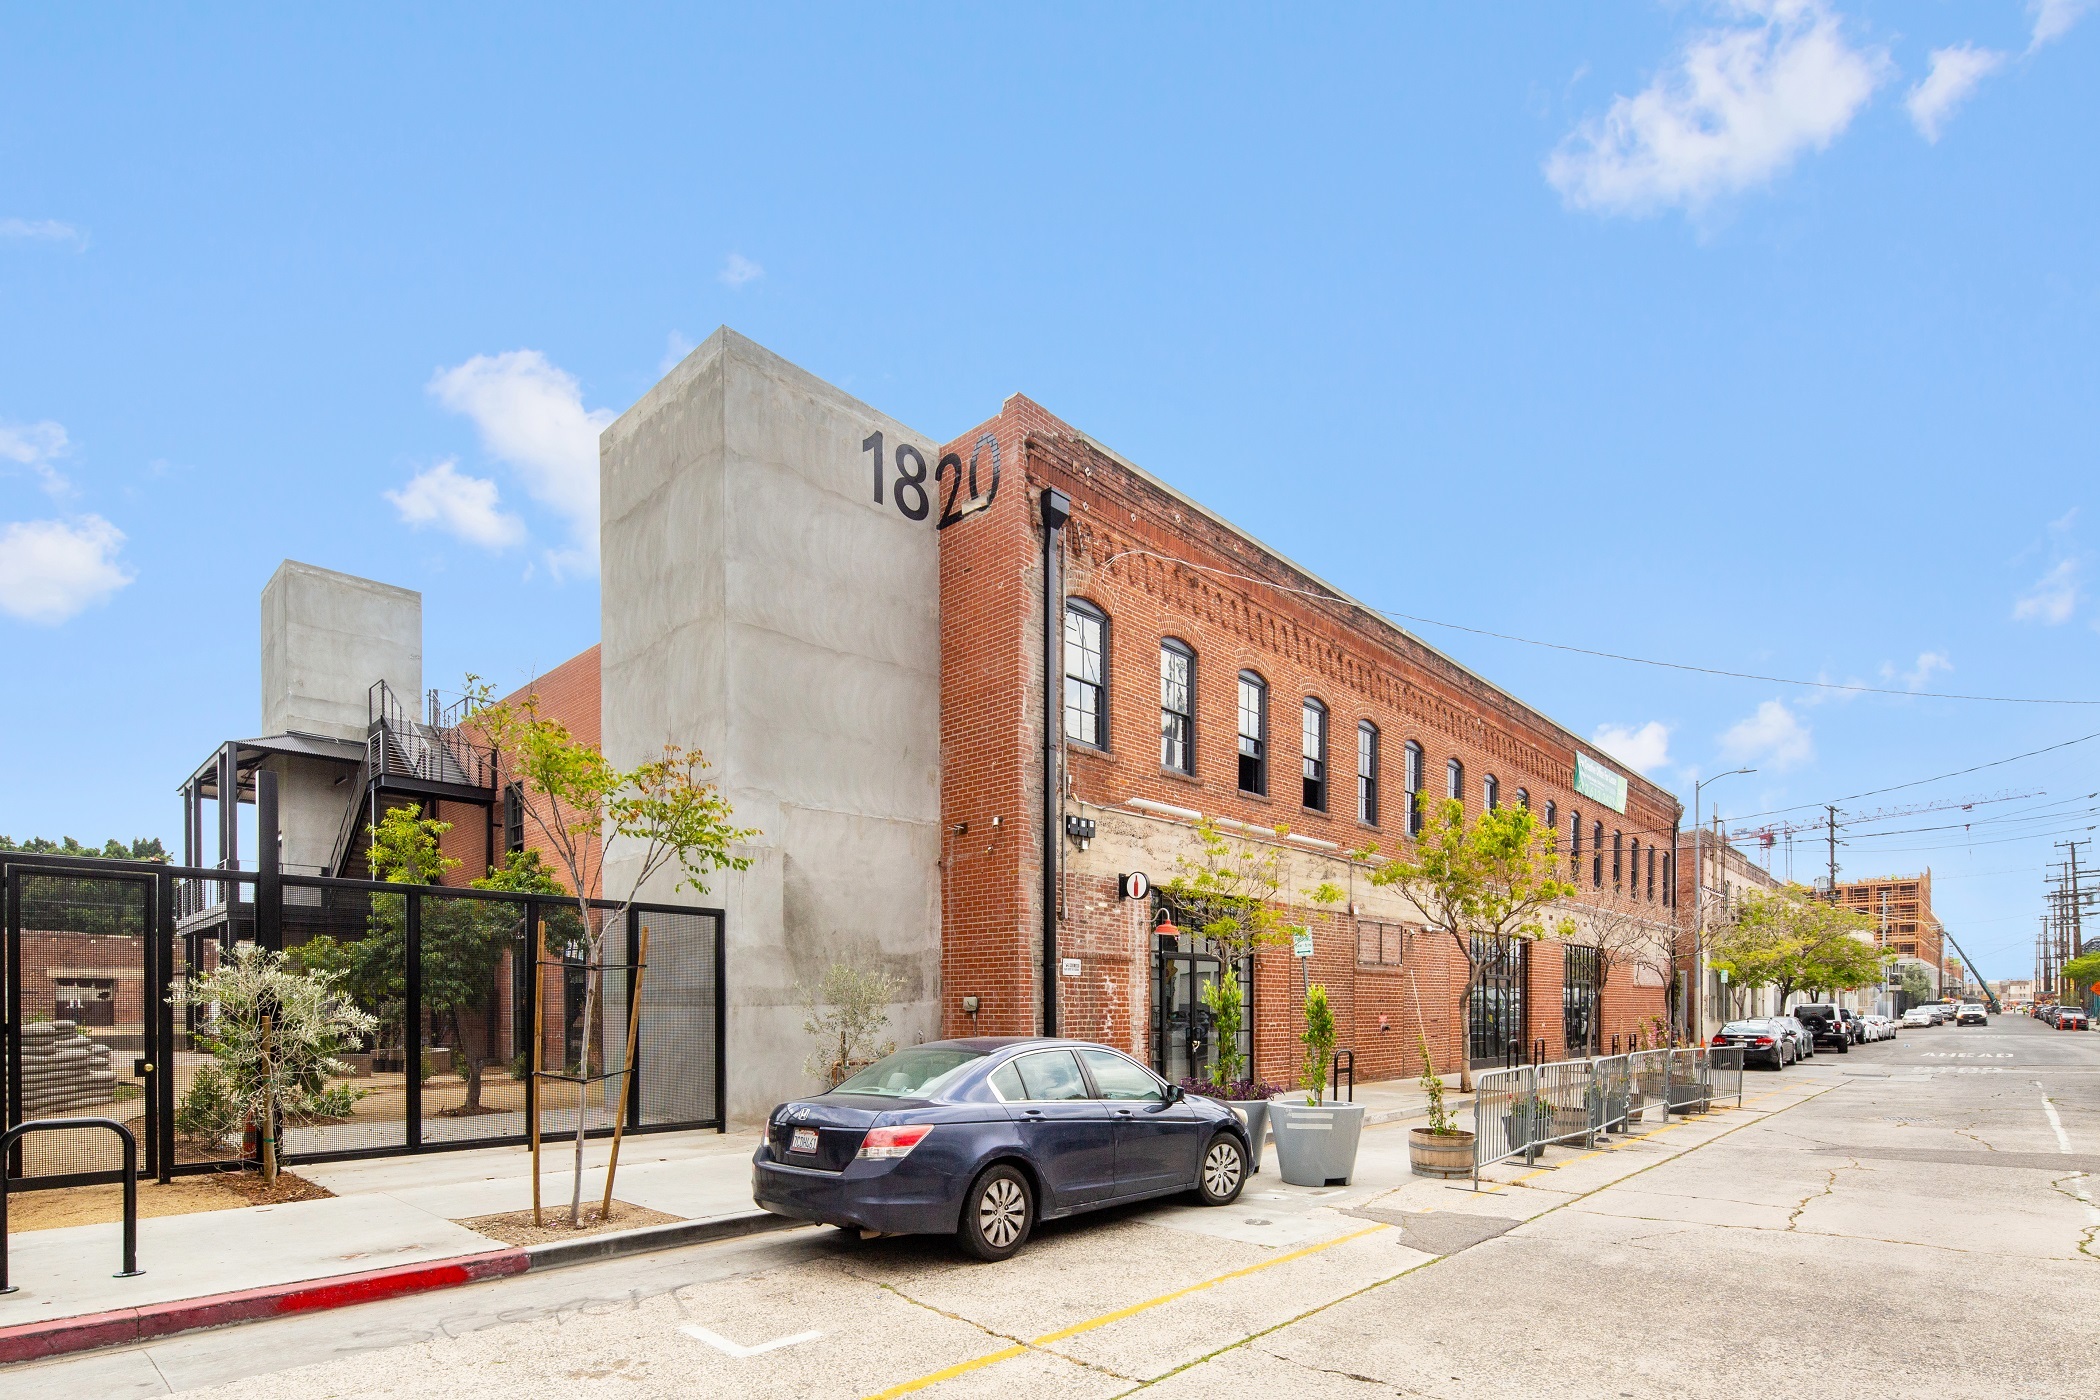 The roughly 40,000-square-foot 1820 Industrial St. building in downtown Los Angeles' Arts District neighborhood has a new owner. (CoStar)